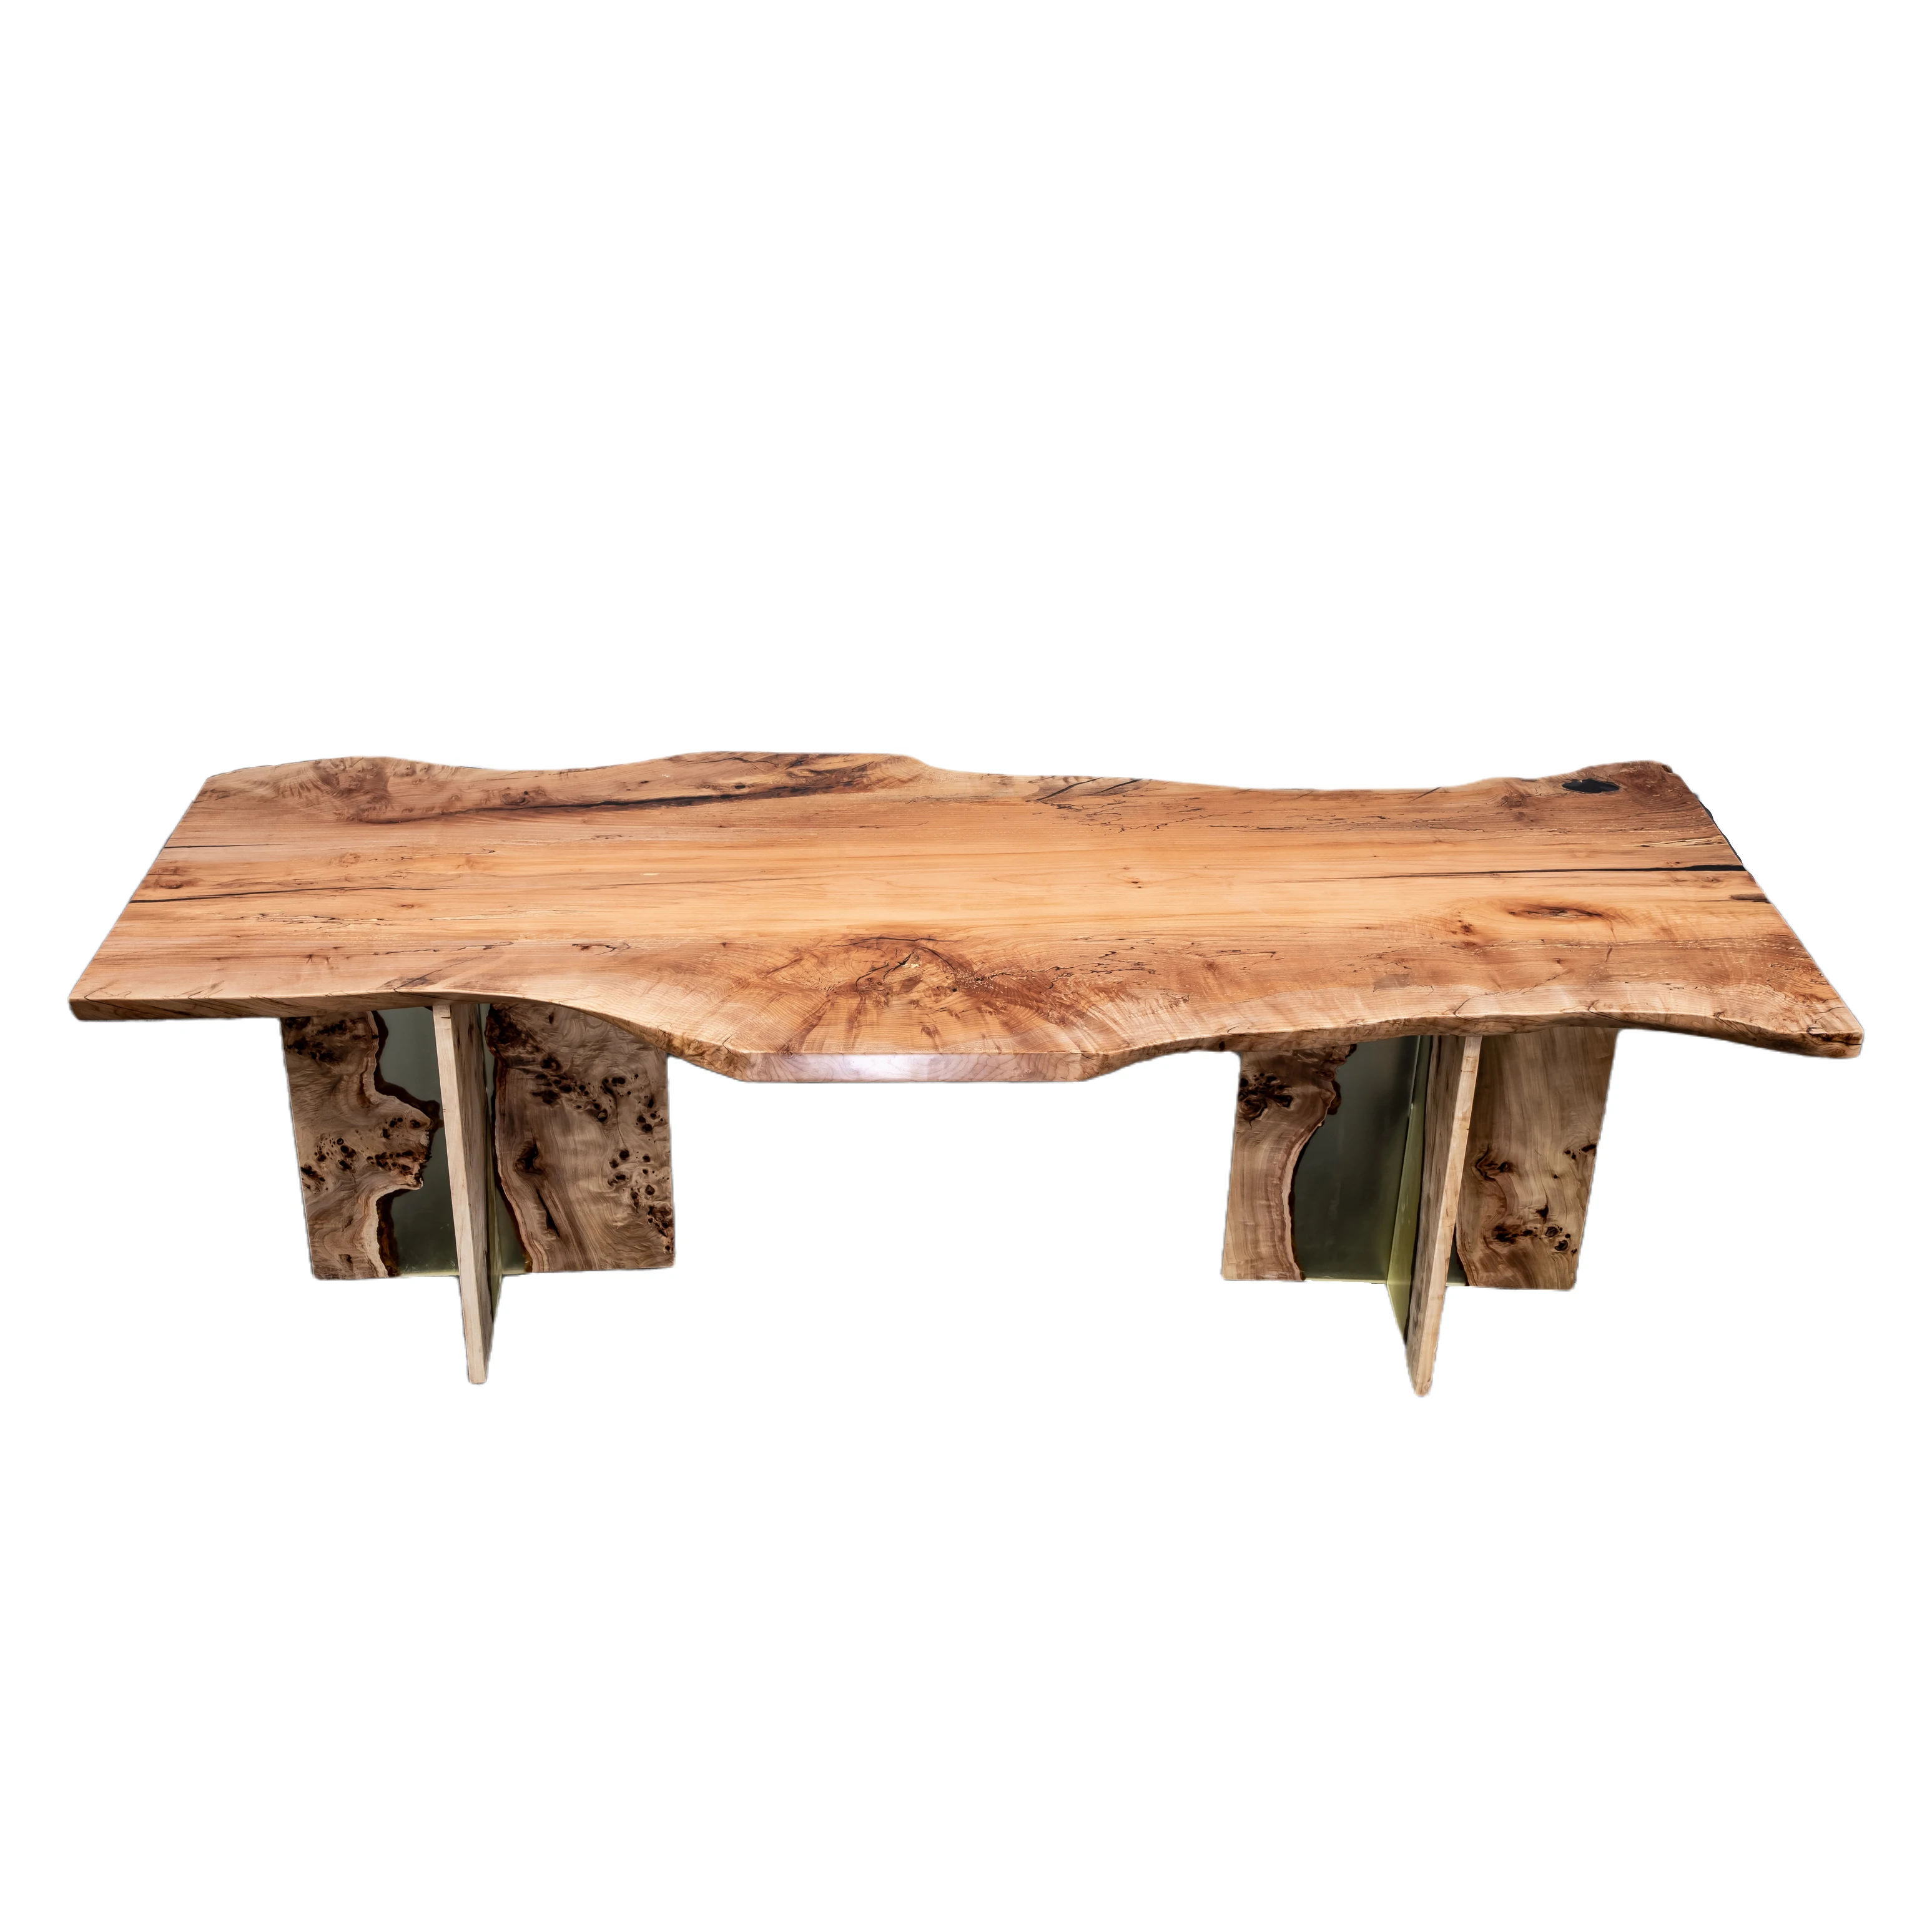 Wood Slab Live Edge Table Top Fashionable Design Office Square Maple Solid Dining Table North American Walnut Wood Modern 1pcs Buy Unique Wooden Slab